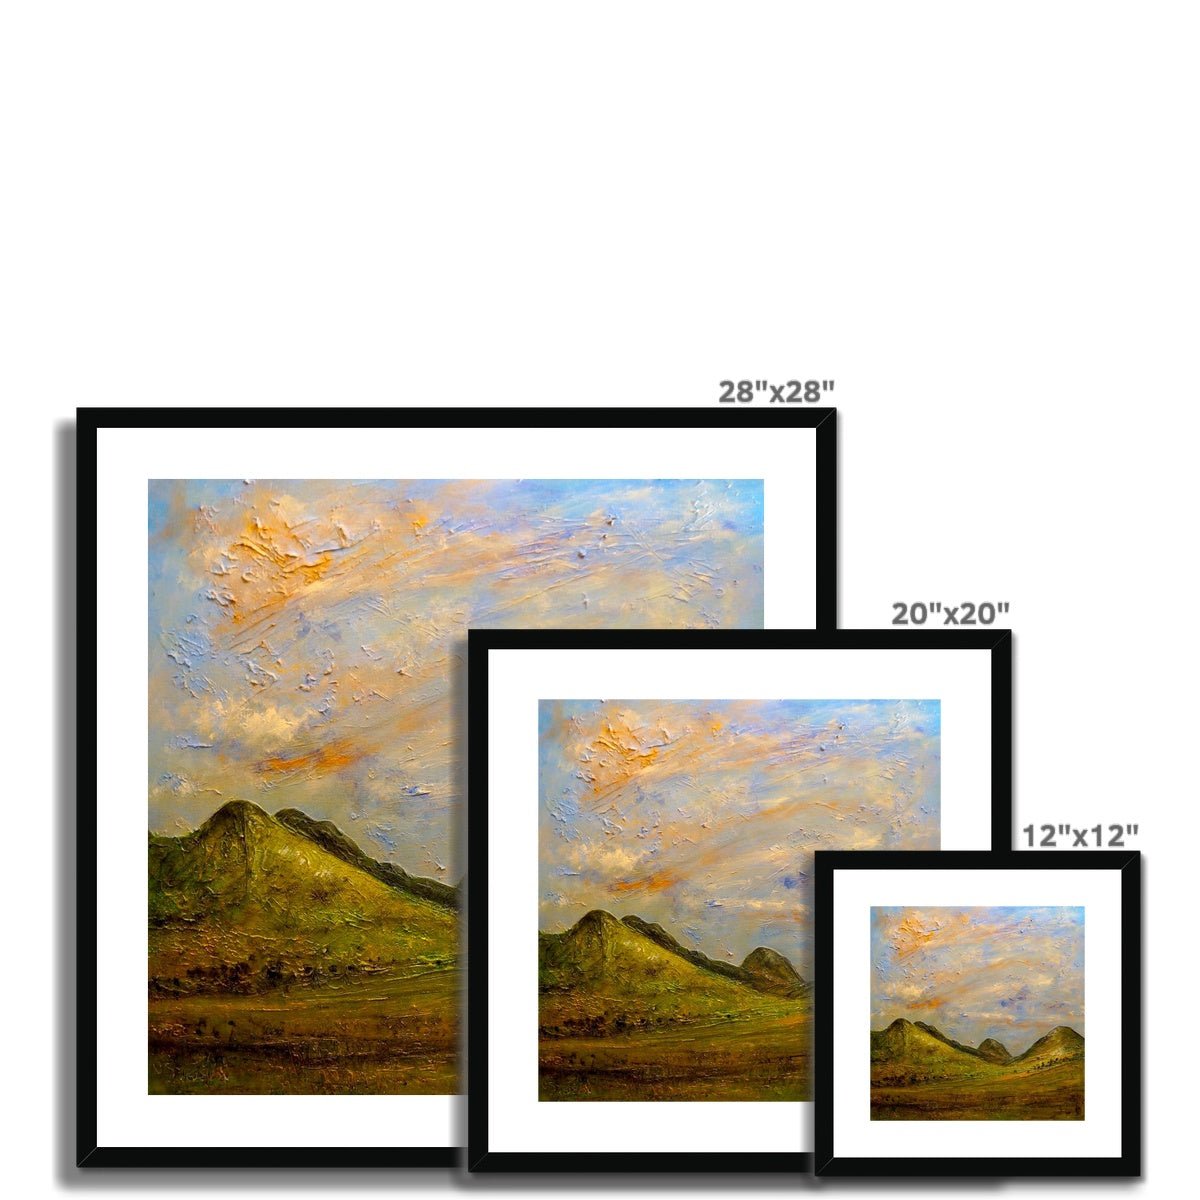 Glencoe Summer Painting | Framed & Mounted Prints From Scotland-Framed & Mounted Prints-Glencoe Art Gallery-Paintings, Prints, Homeware, Art Gifts From Scotland By Scottish Artist Kevin Hunter